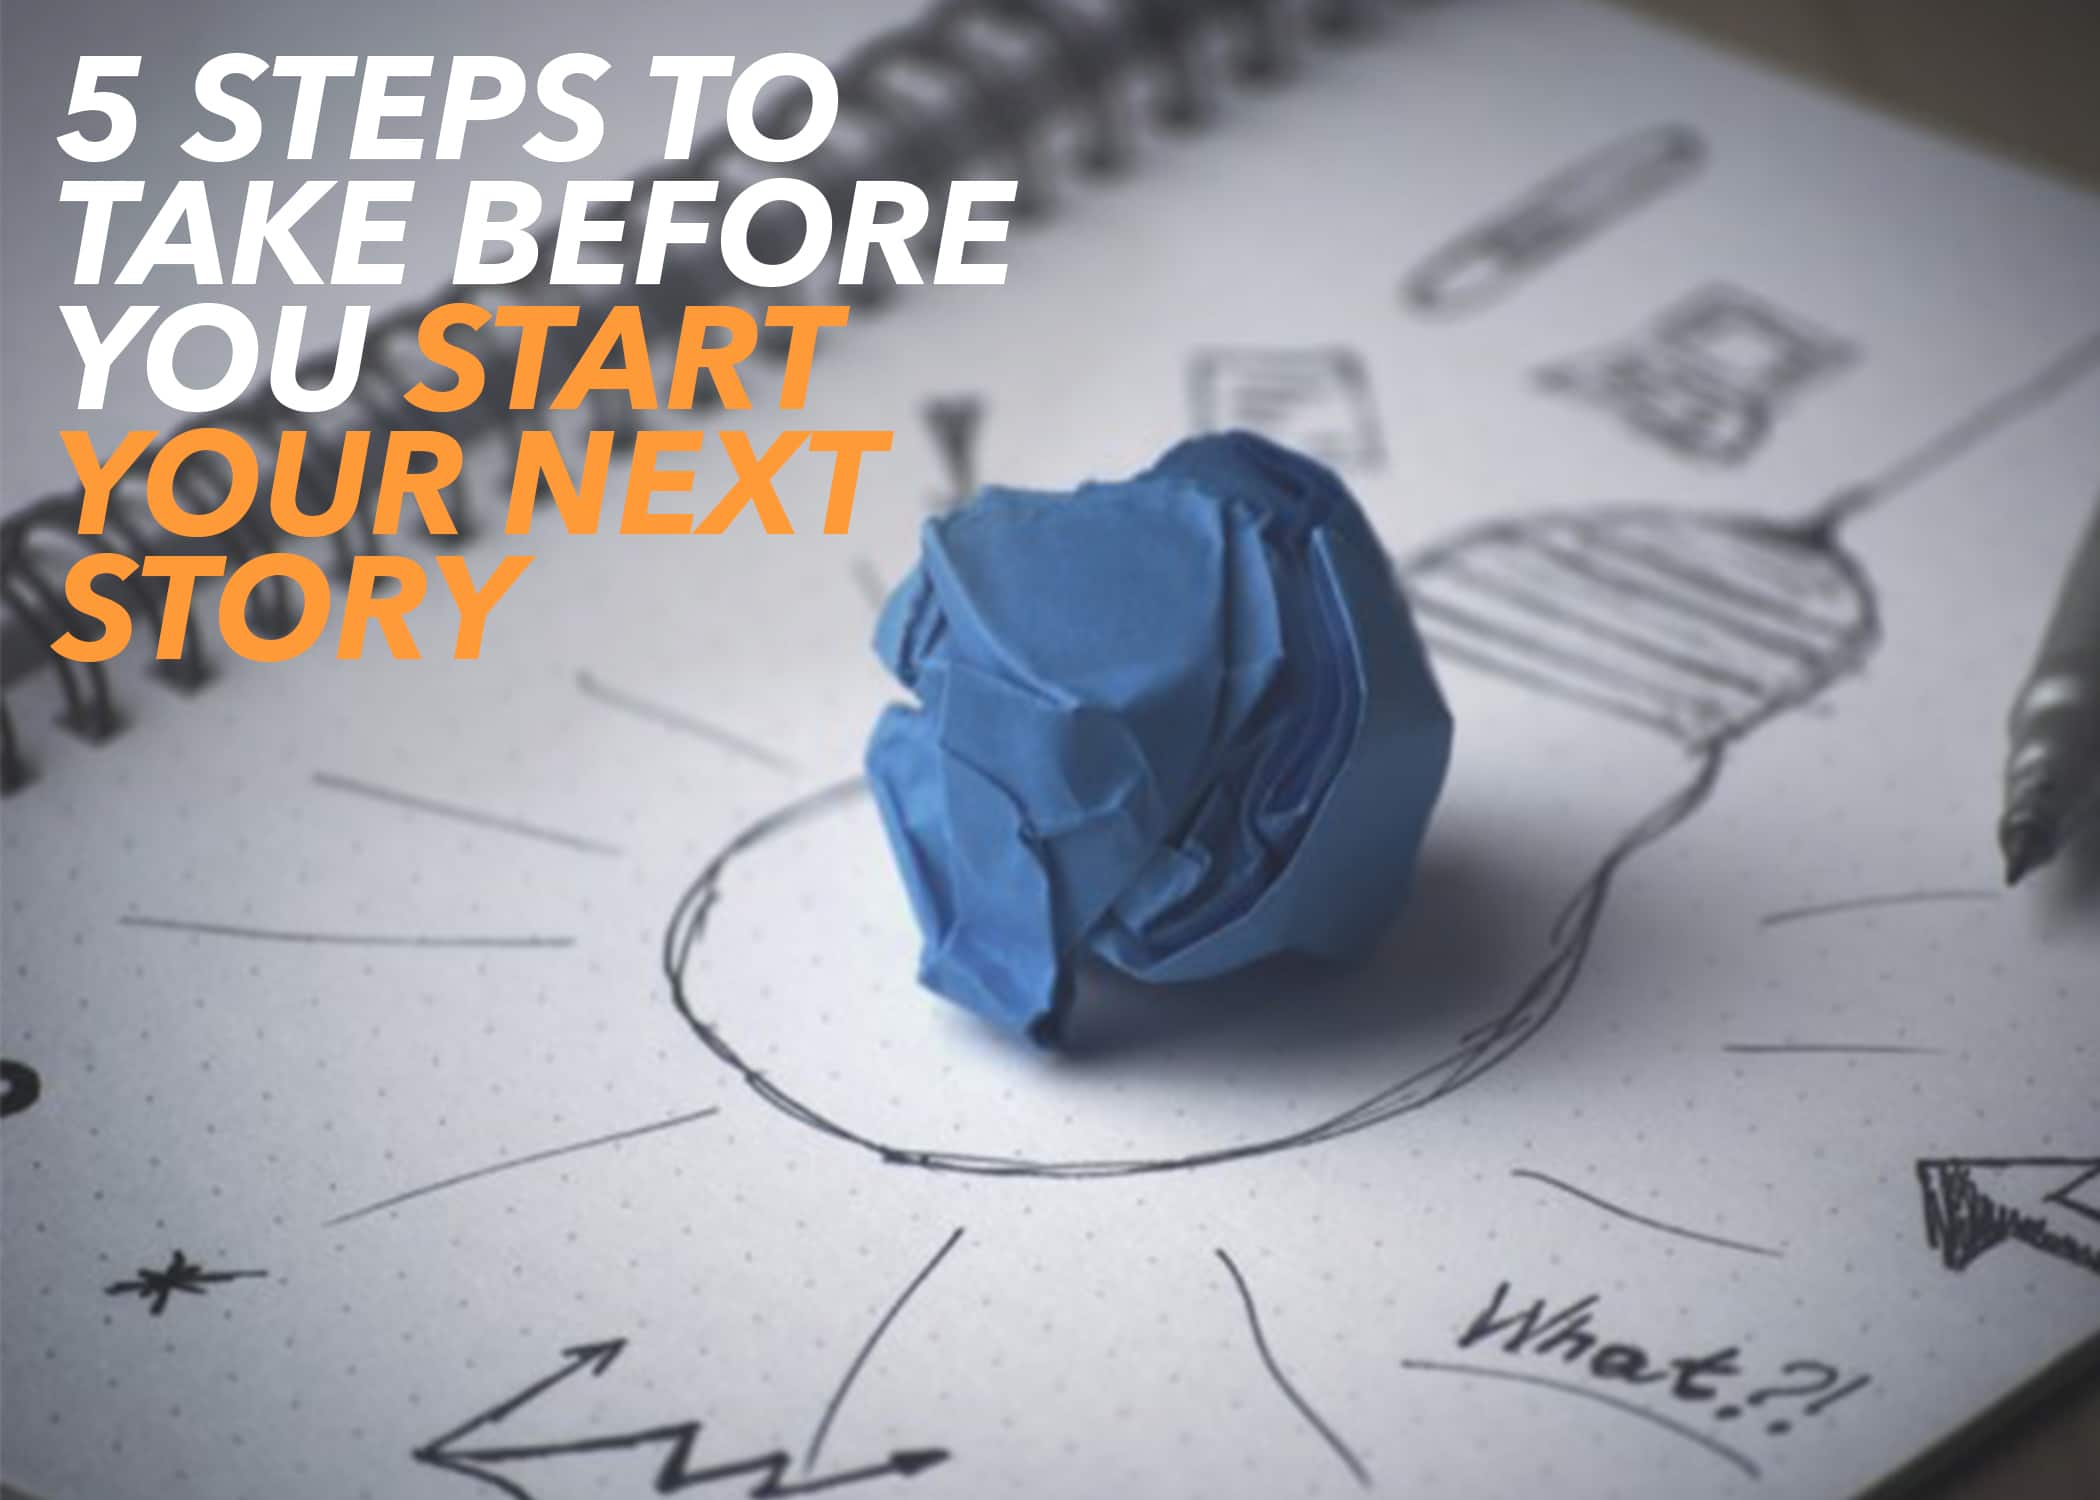 5 Steps to Take Before You Start Your Next Story